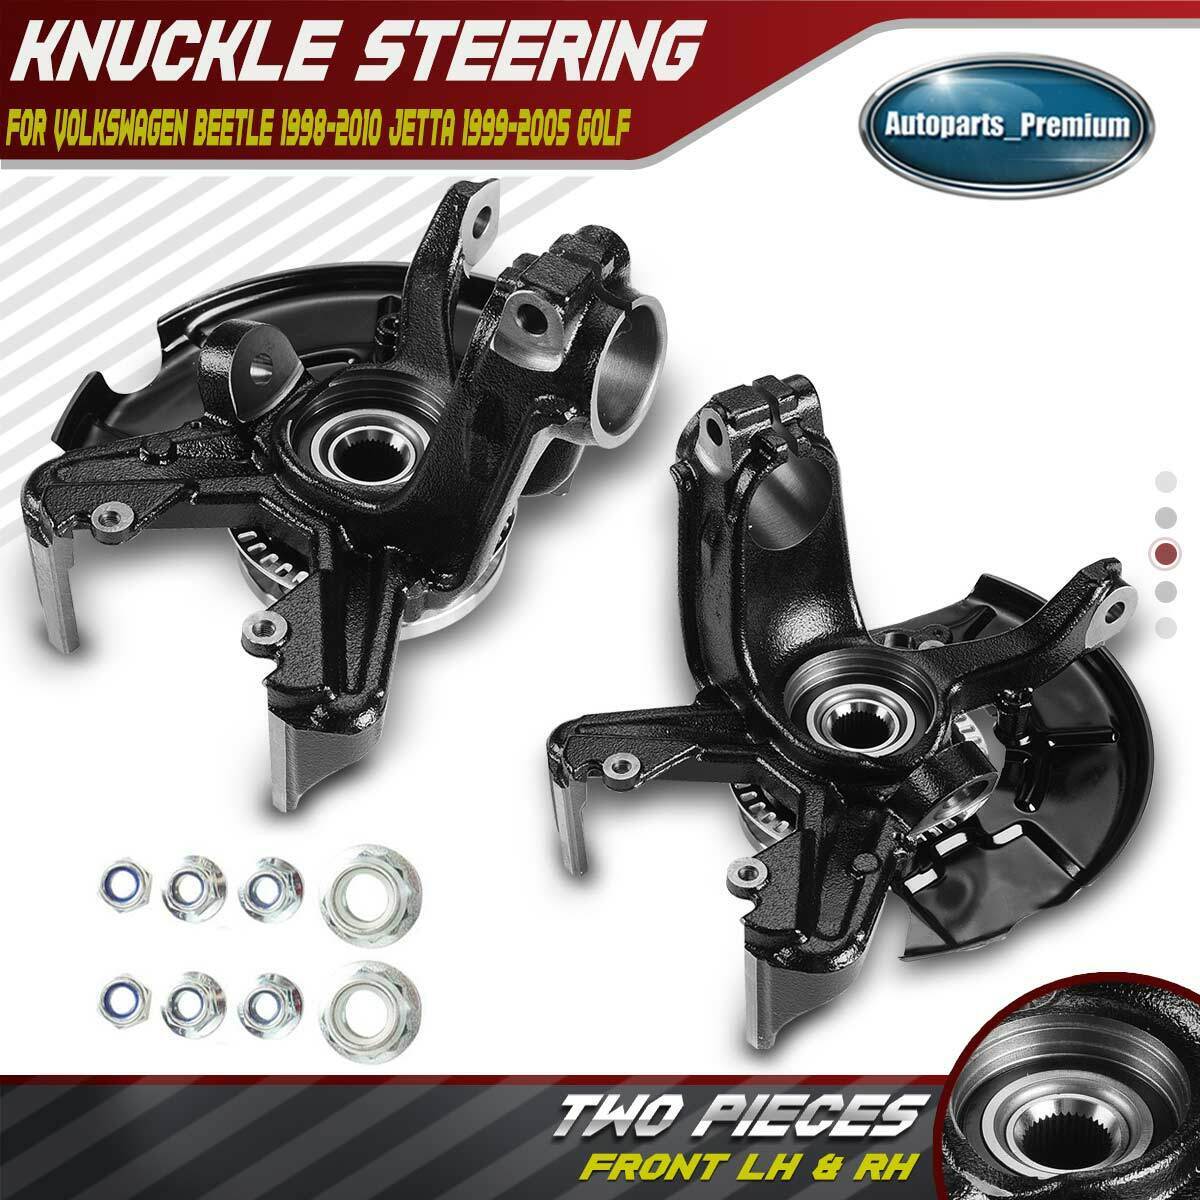 2x Front Steering Knuckle & Wheel Hub Bearing Assembly for VW Beetle Golf Jetta